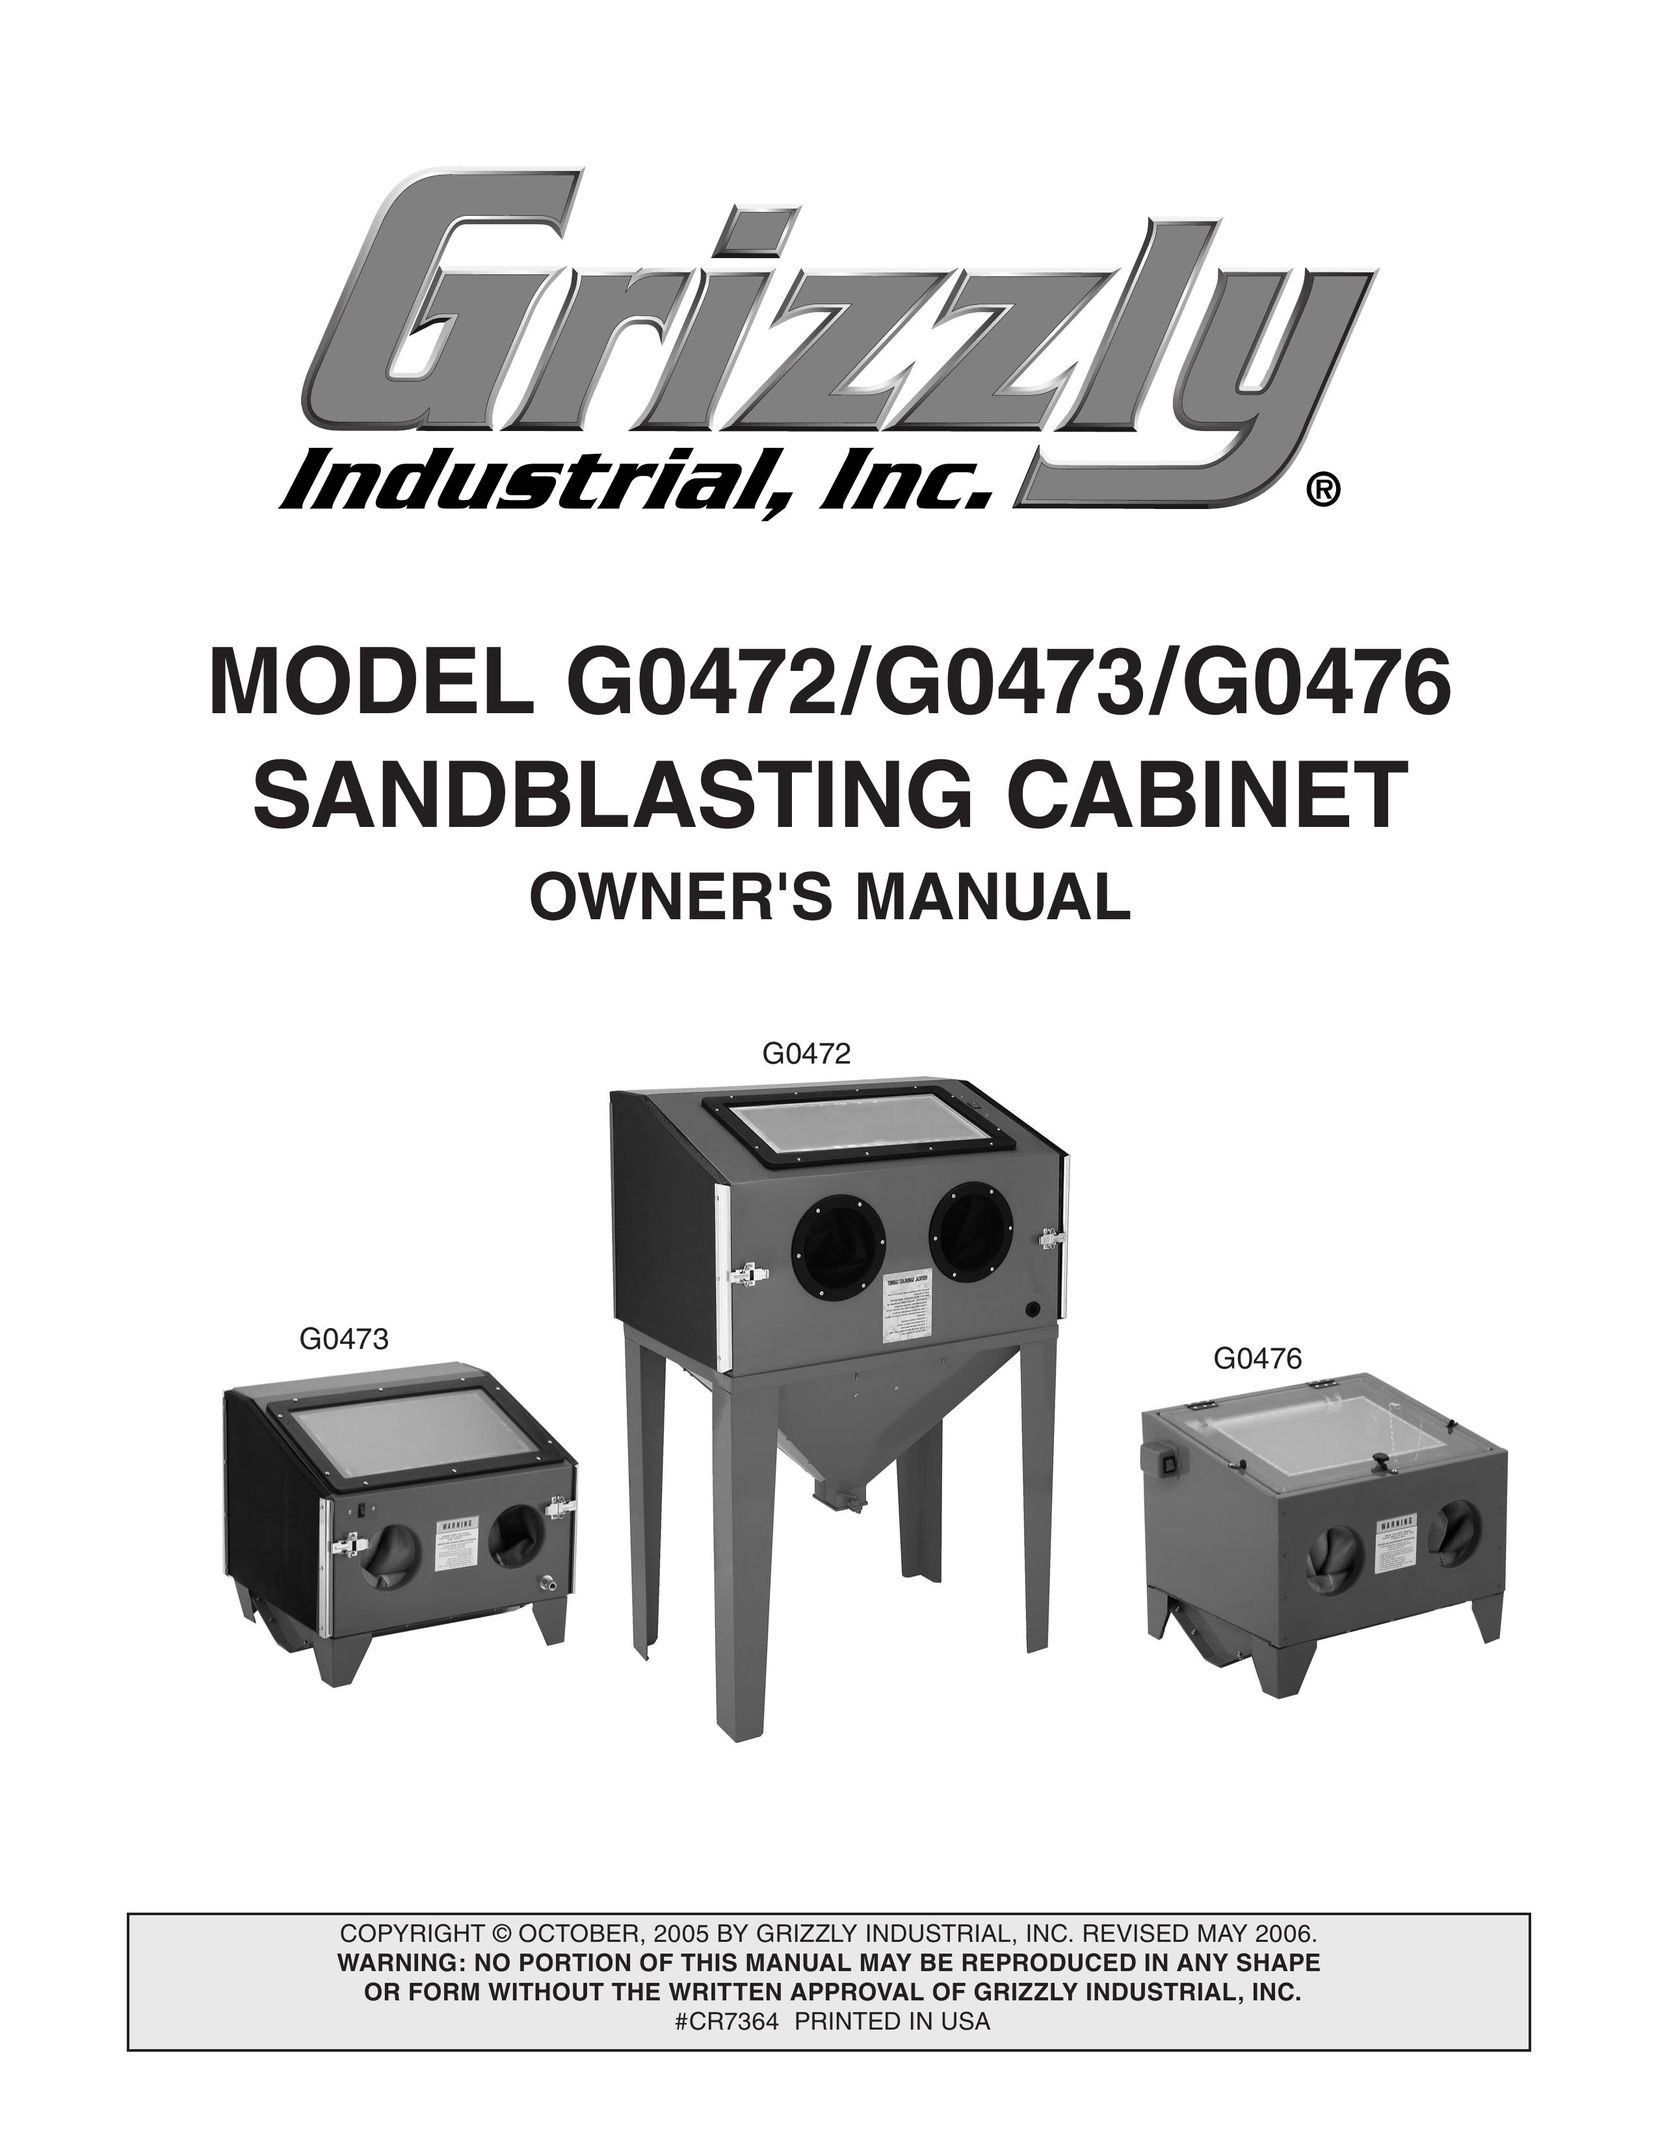 Grizzly G0472 Sander User Manual